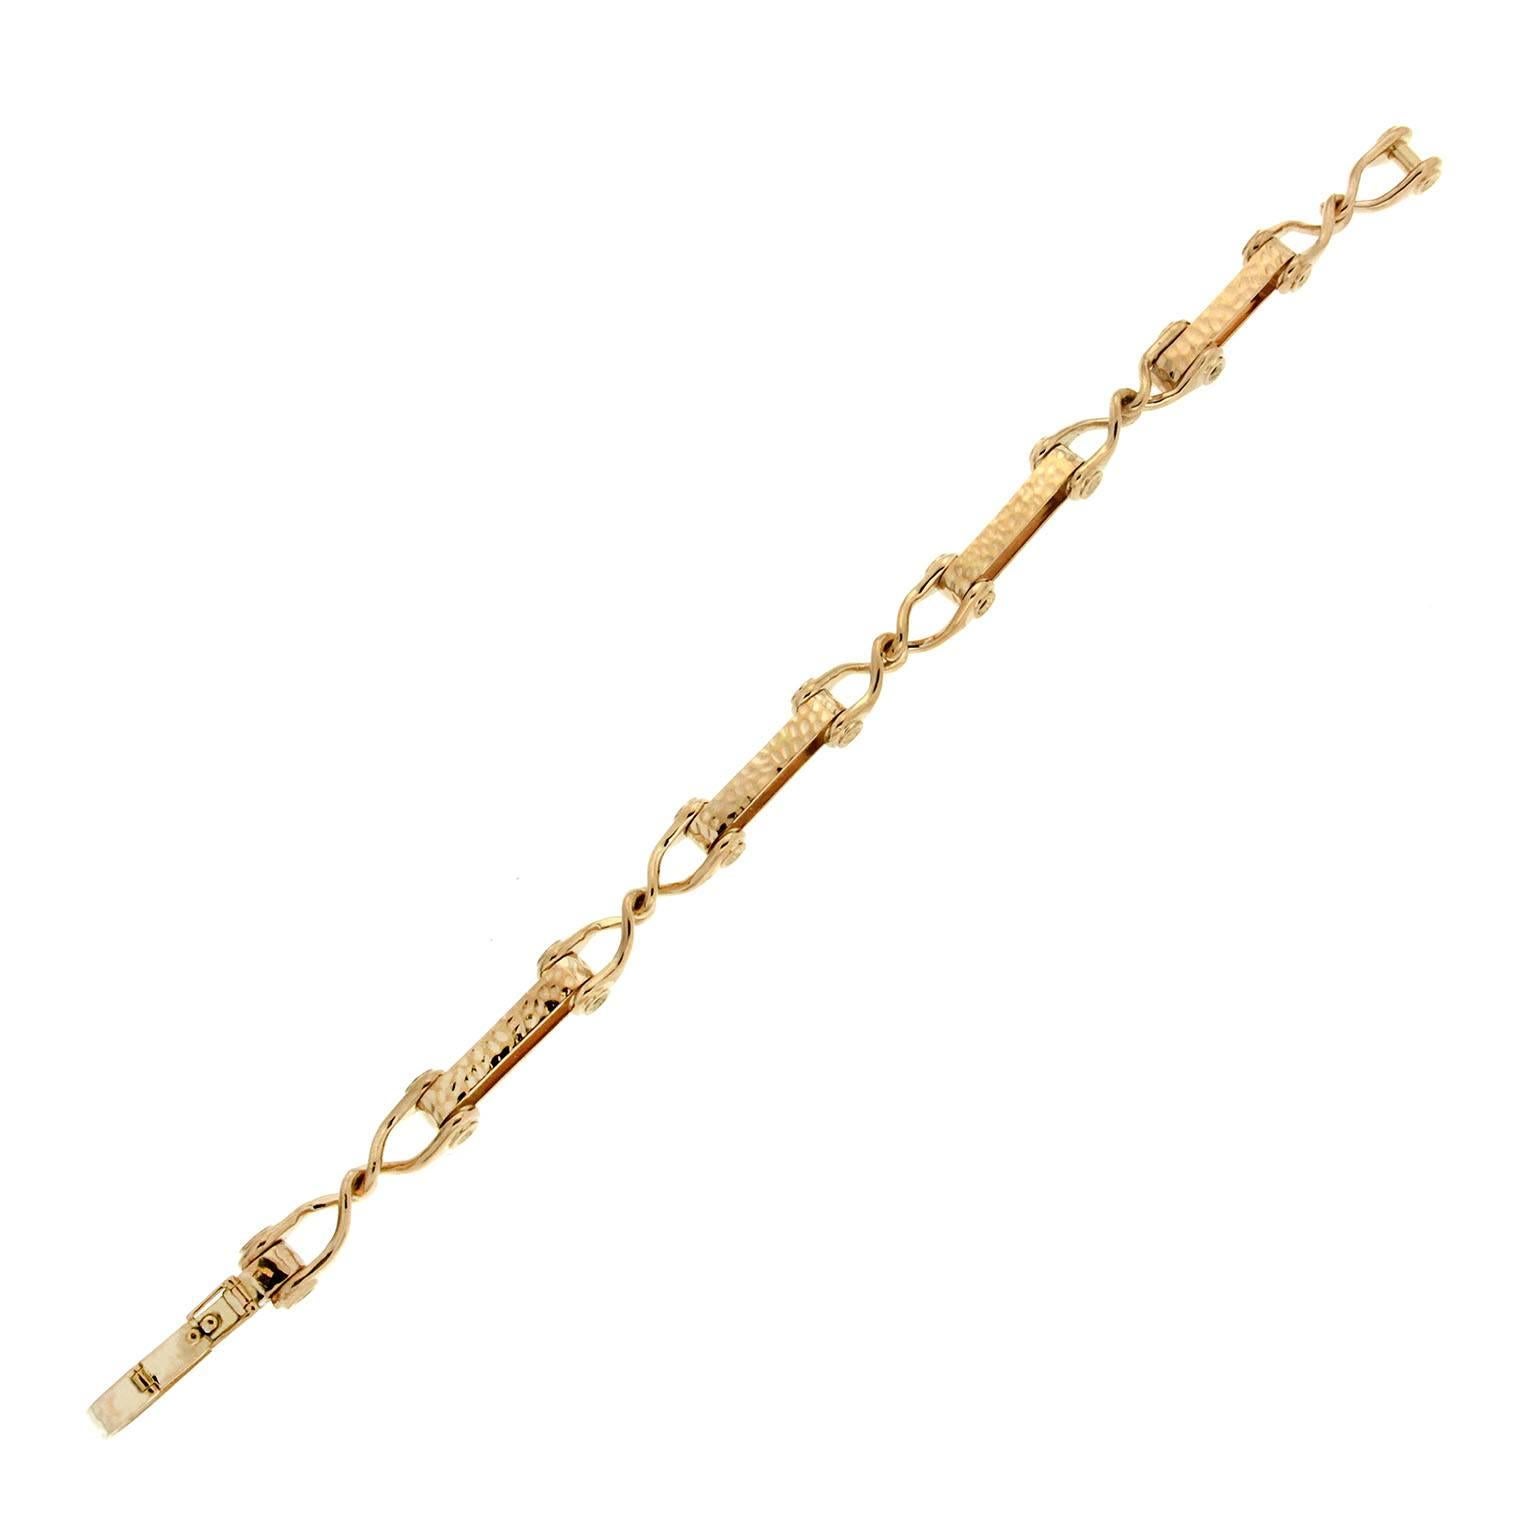 This unique and simple bracelet features 5 double textured bar jointed with wire knot in 18kt yellow gold.